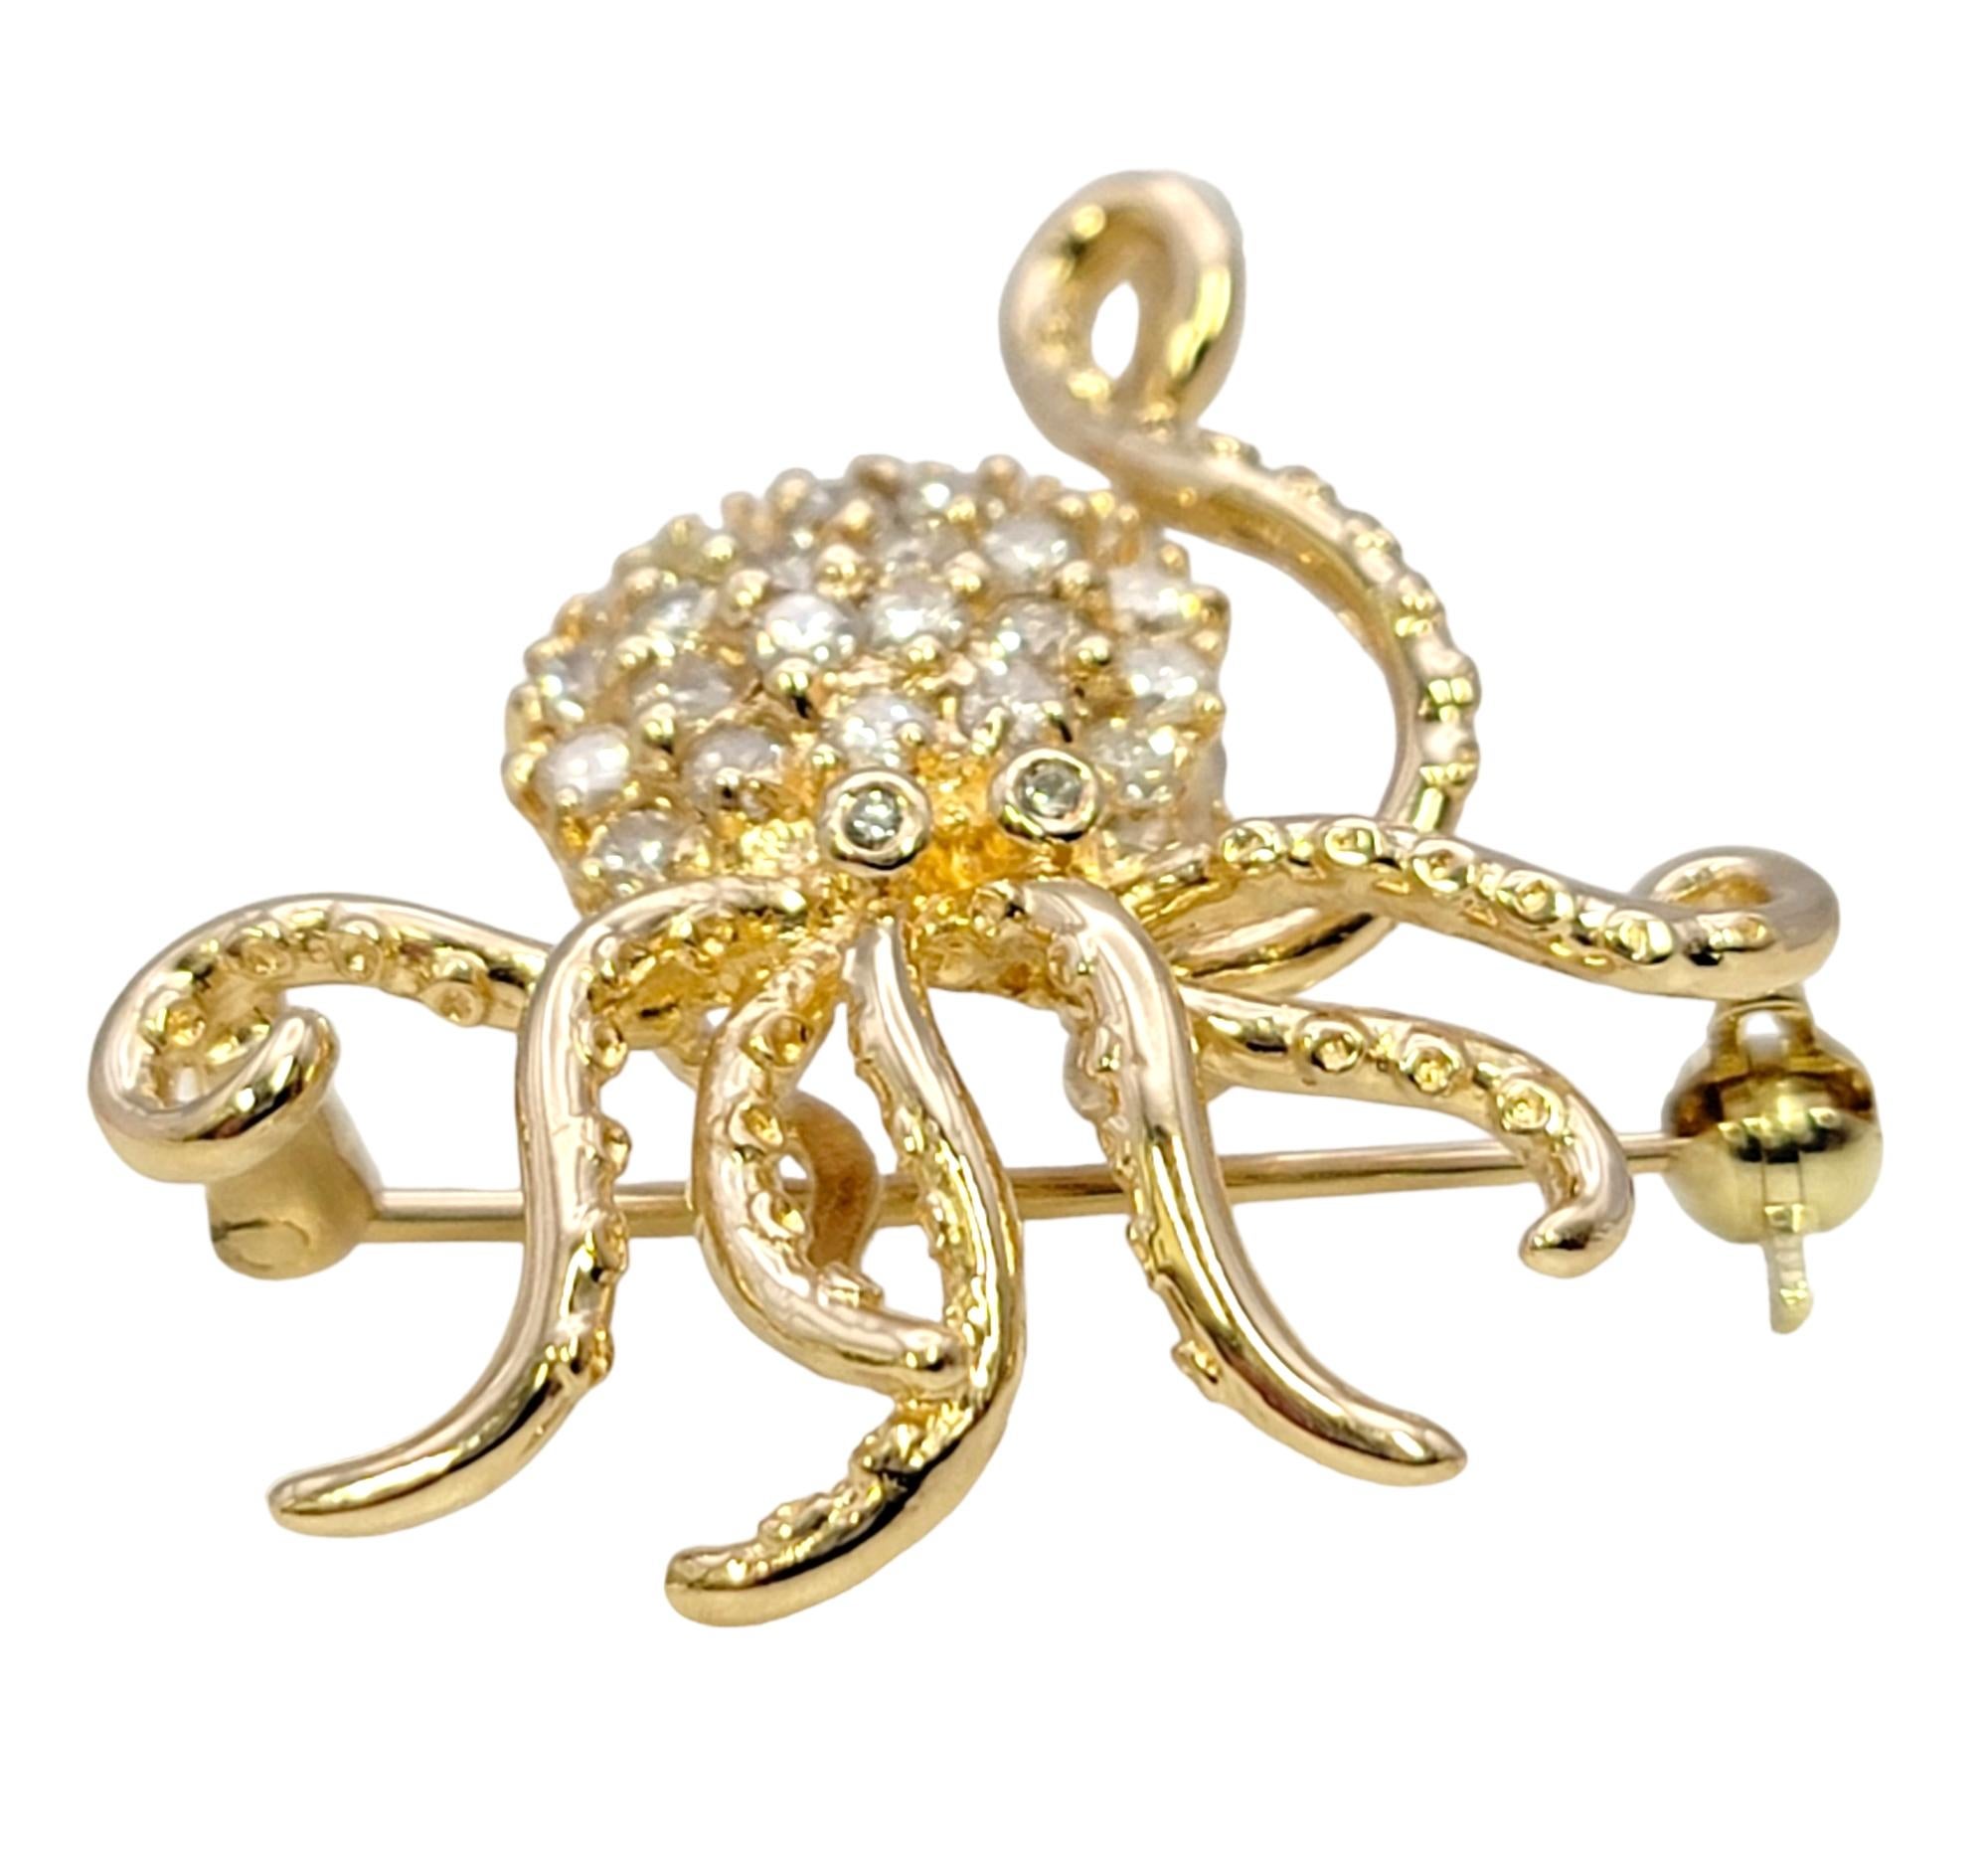 Calling all ocean lovers! This charming little octopus brooch / pendant will remind you of a dazzling day out at the sea. The modernized octopus motif is embellished with glittering natural diamonds, shimmering beautifully in the light and creating